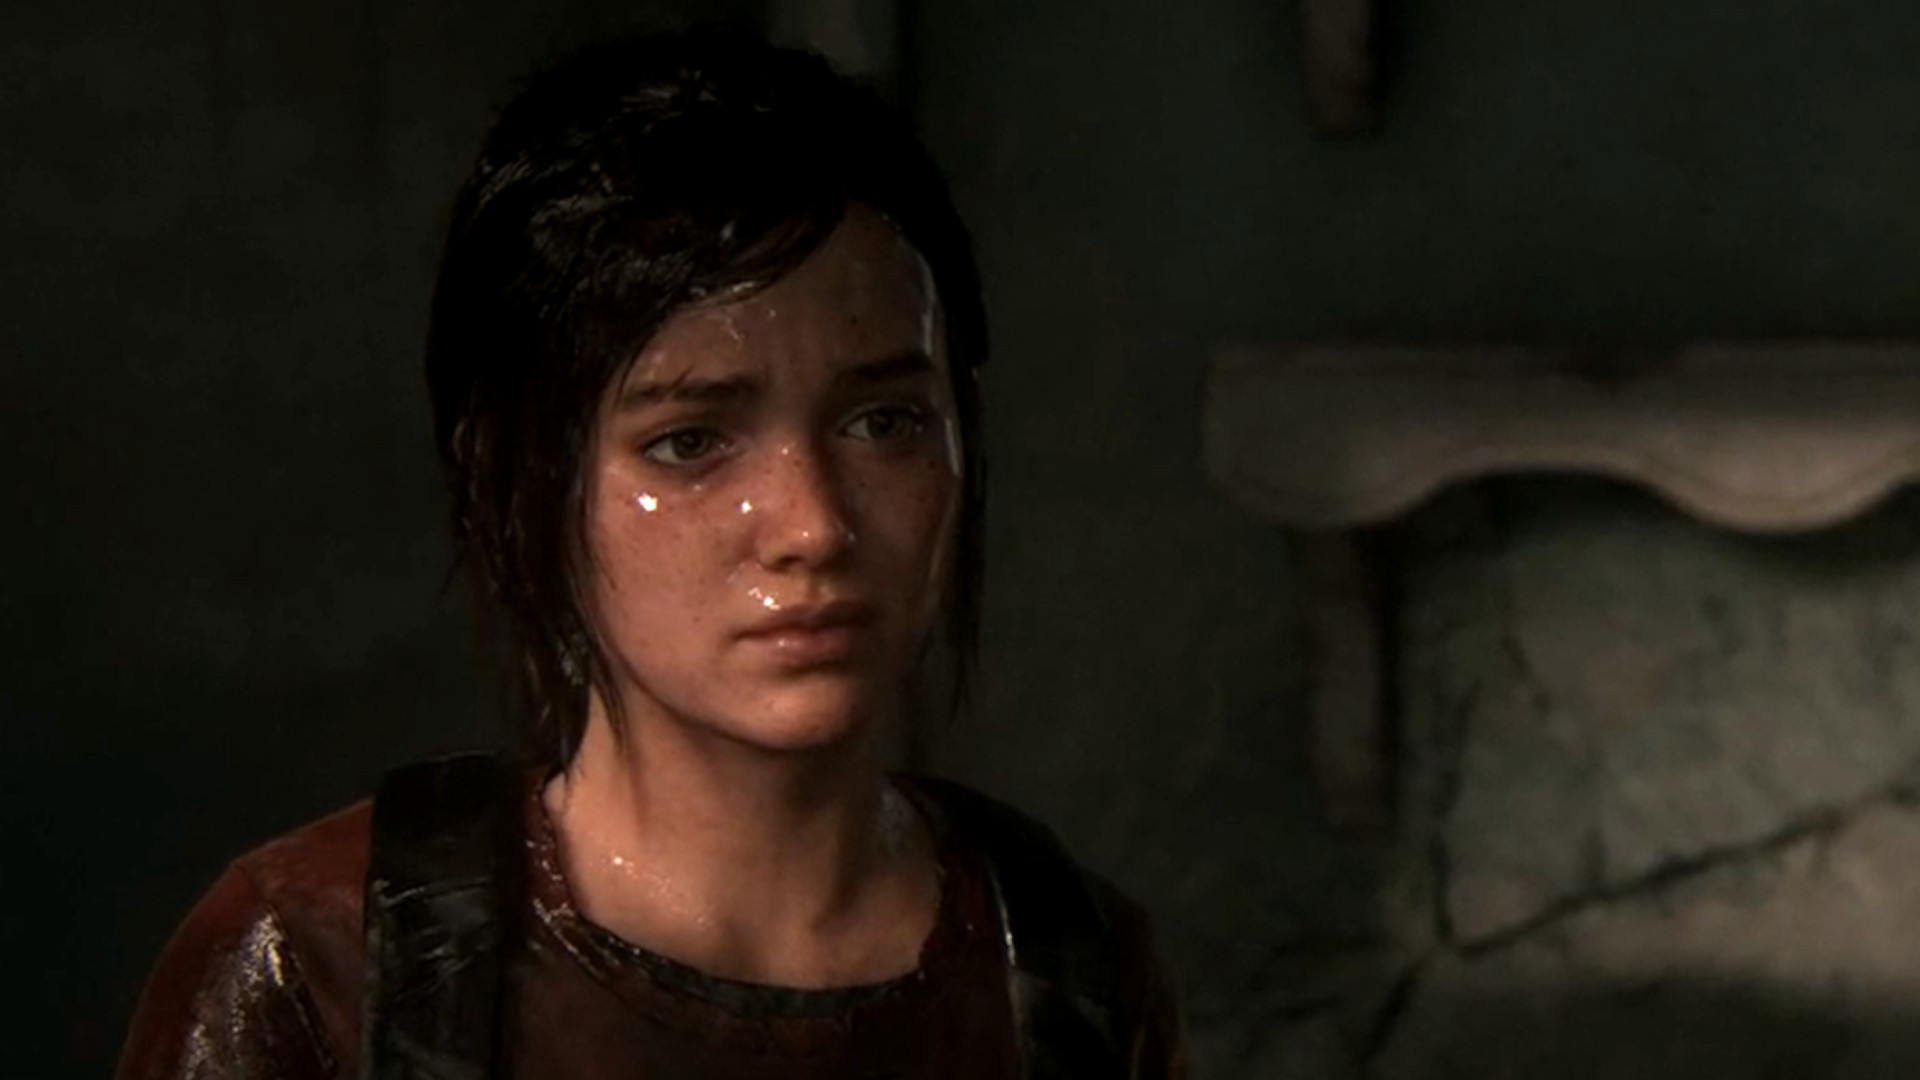 The Last of Us Part 1 on Steam has so many bugs